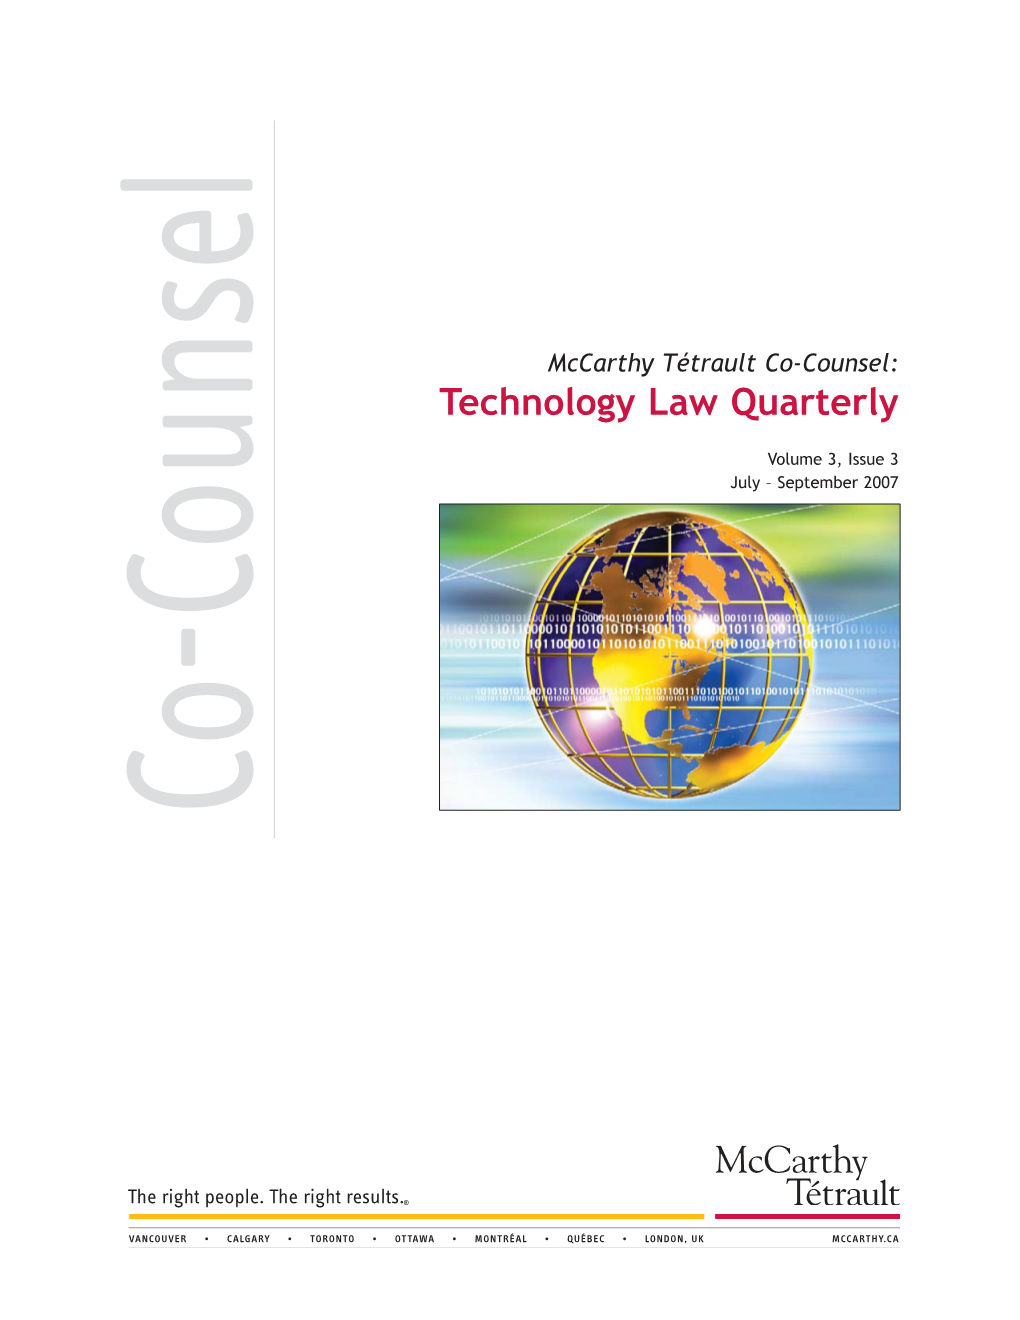 Technology Law Quarterly Volume 3, Issue 3